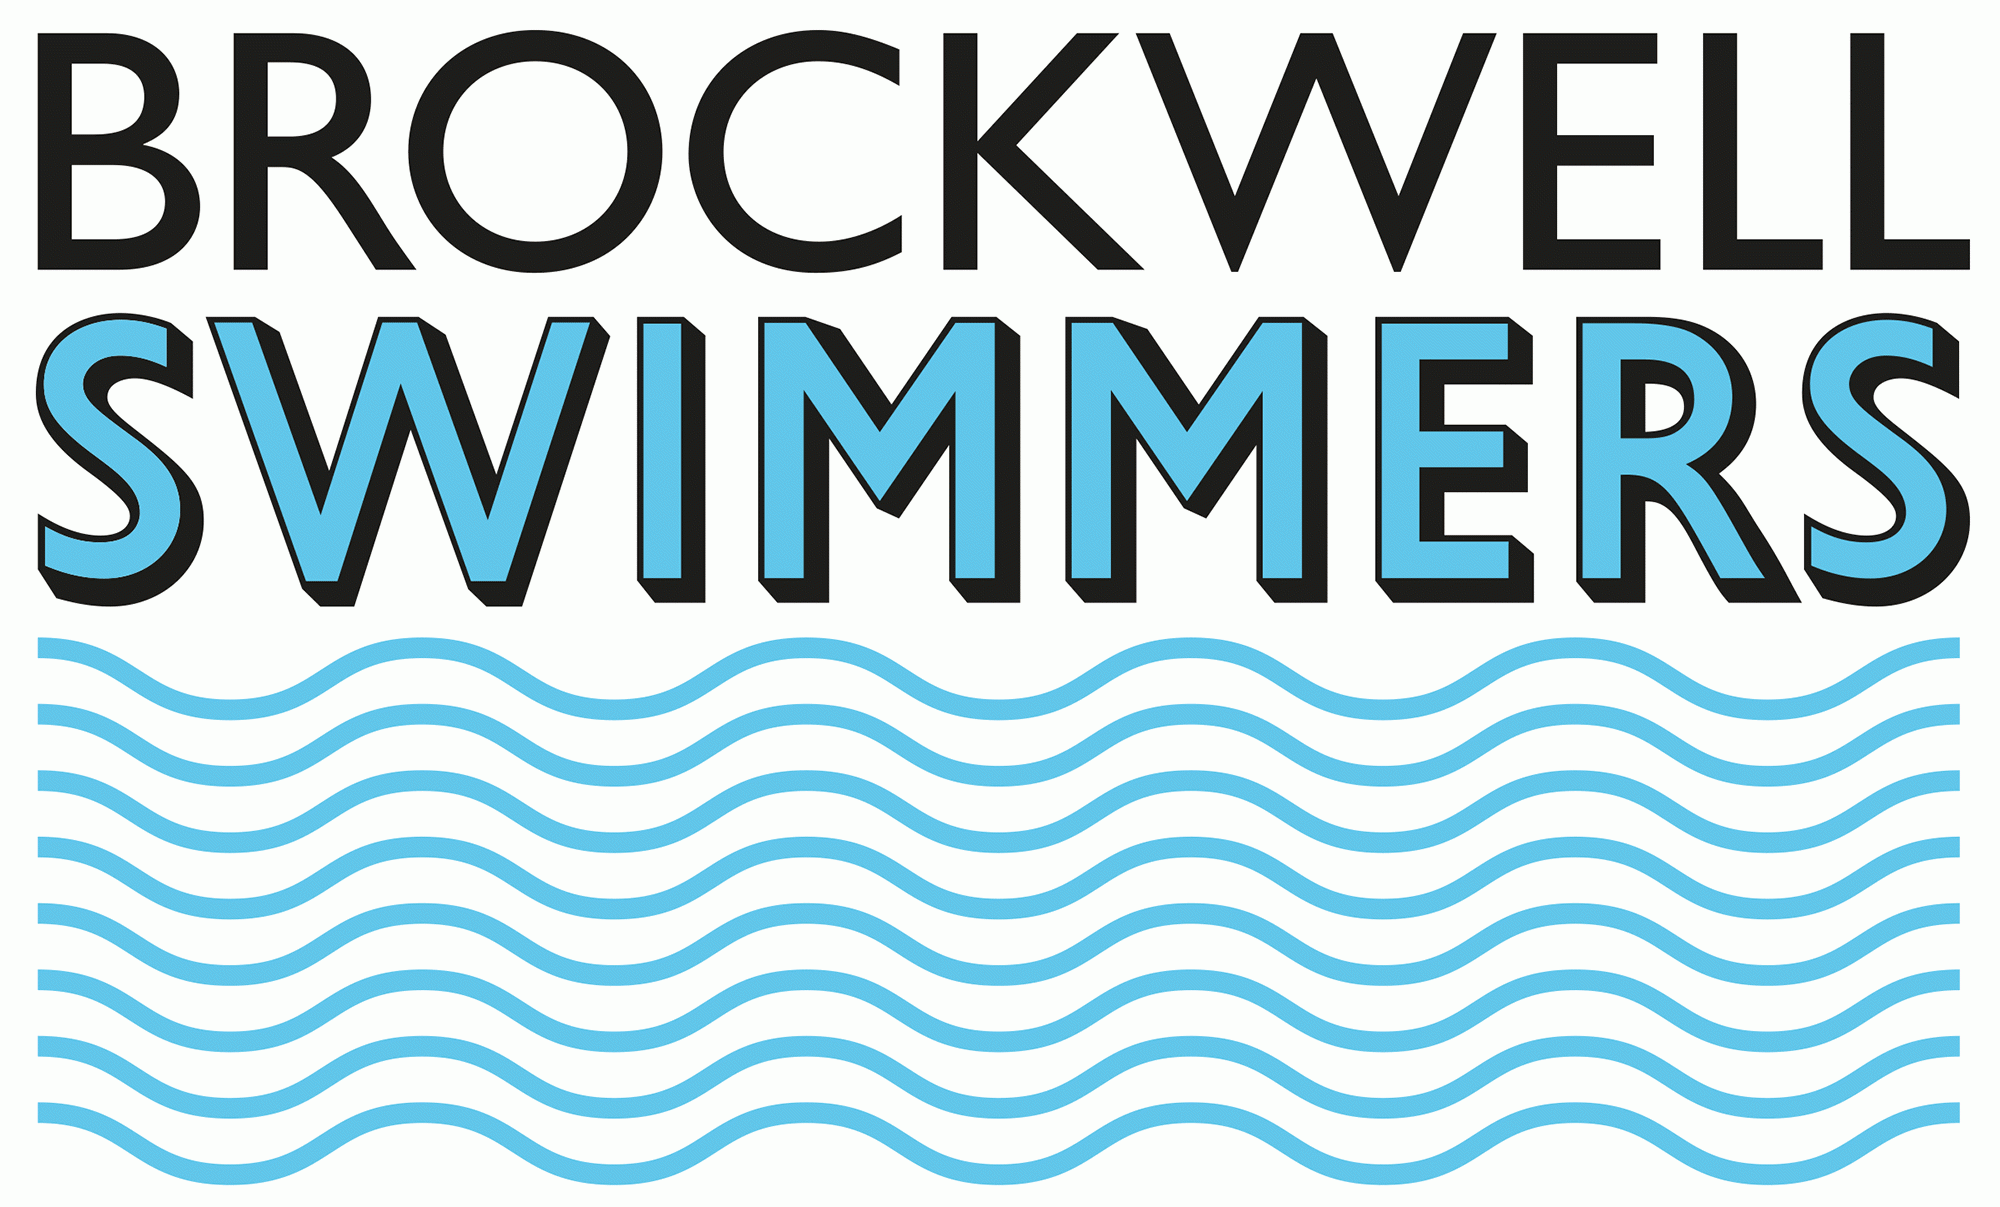 Brockwell Swimmers